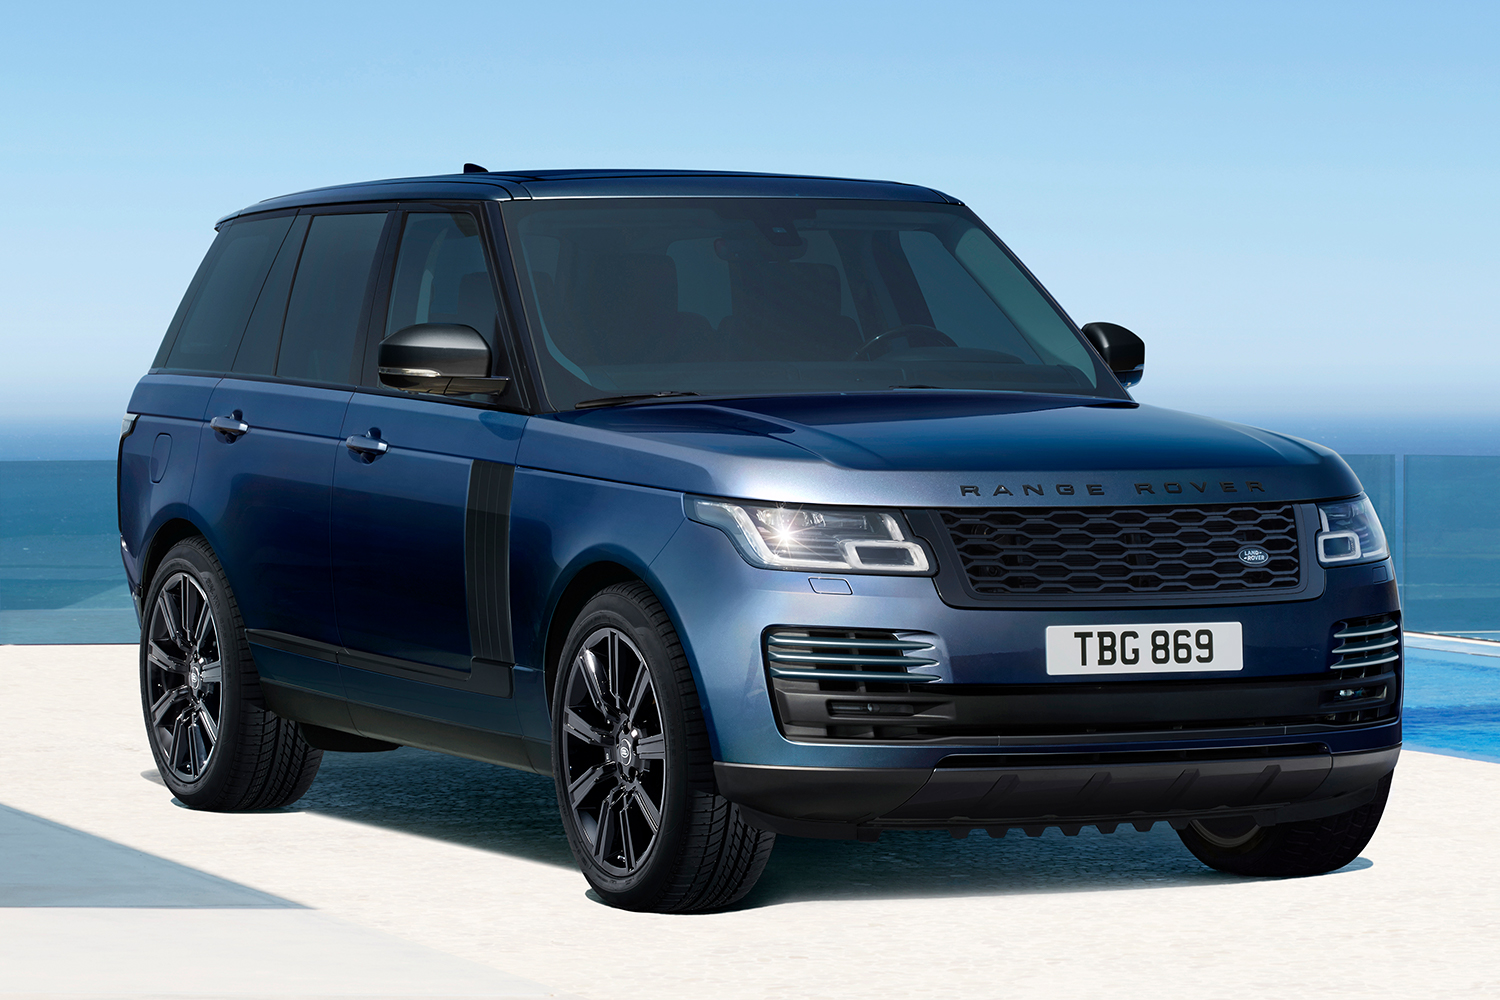 The 2021 Range Rover, the fourth-generation of the luxury SUV, in blue with black accents